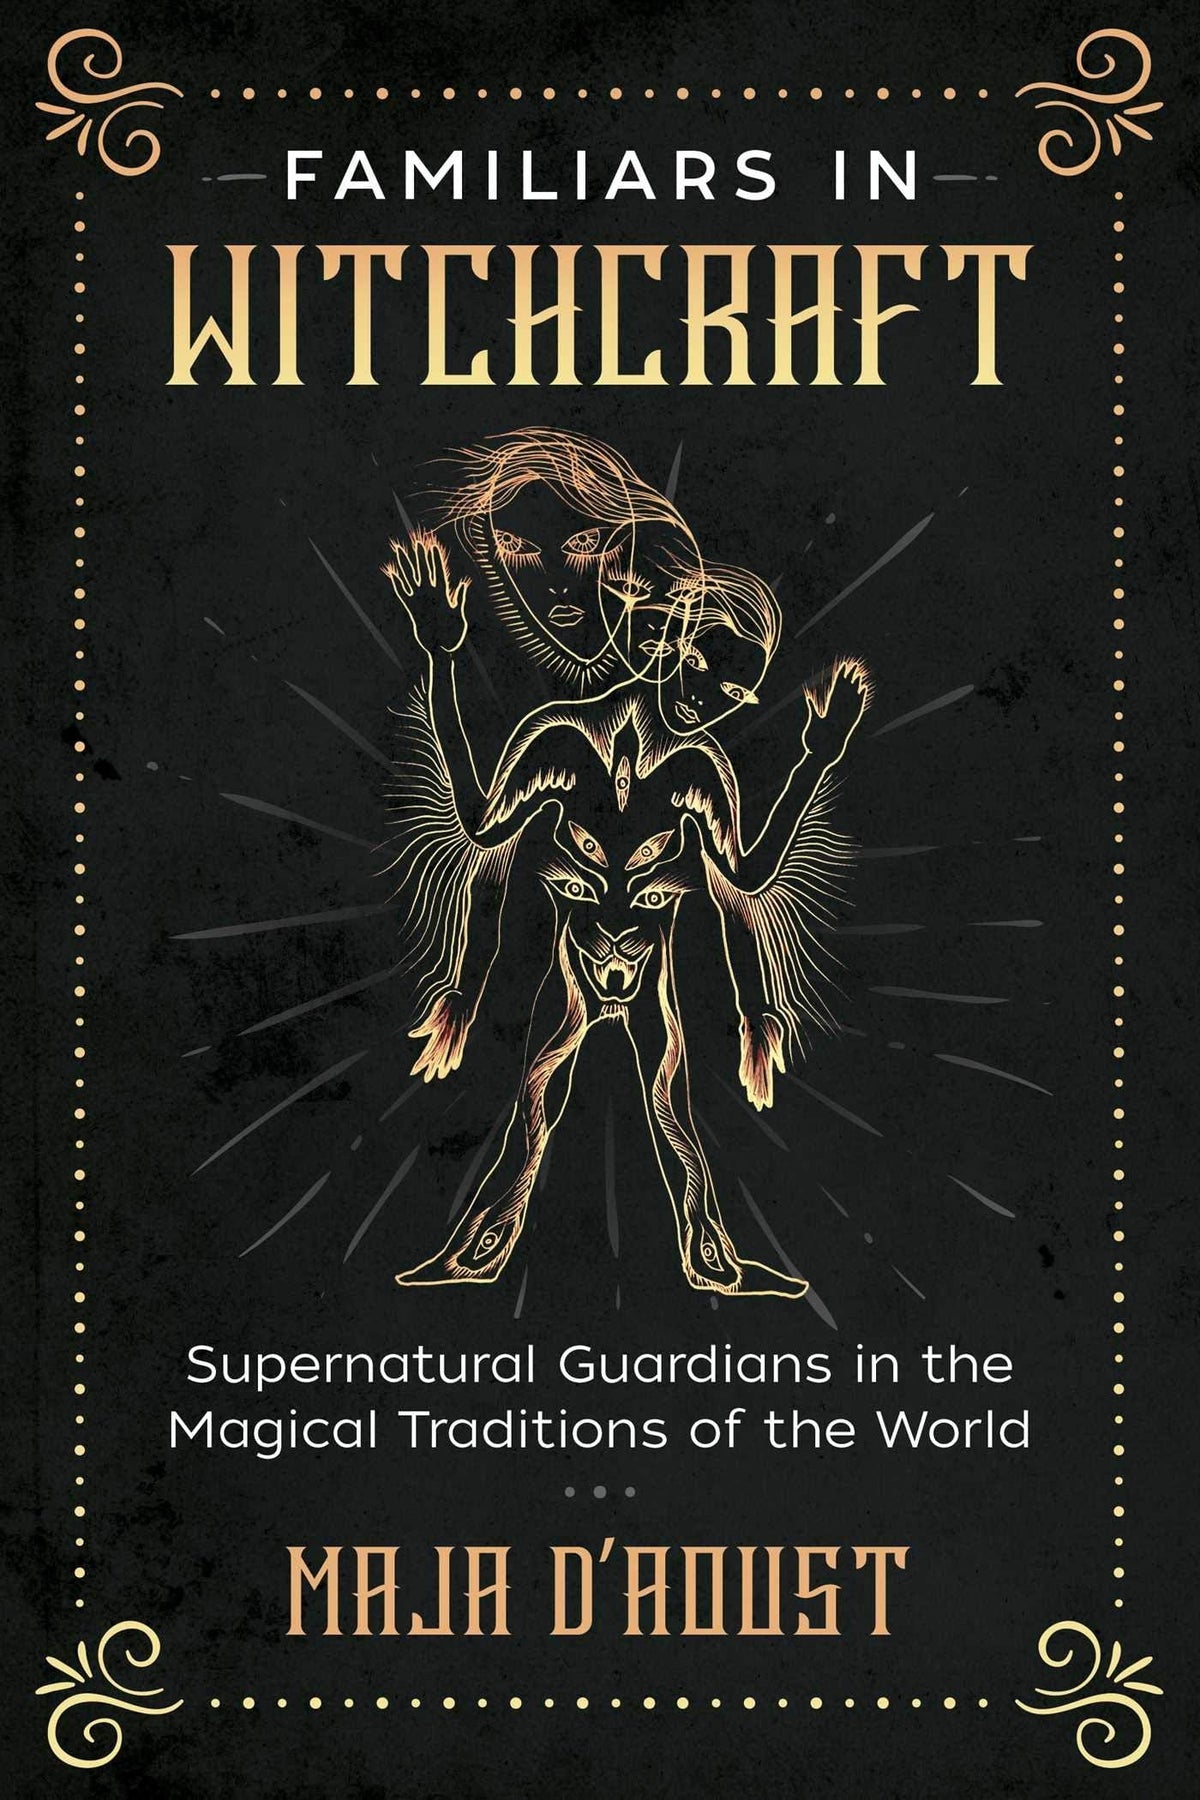 Familiars in Witchcraft: Supernatural Guardians in the Magical Traditions of the World - Third Eye